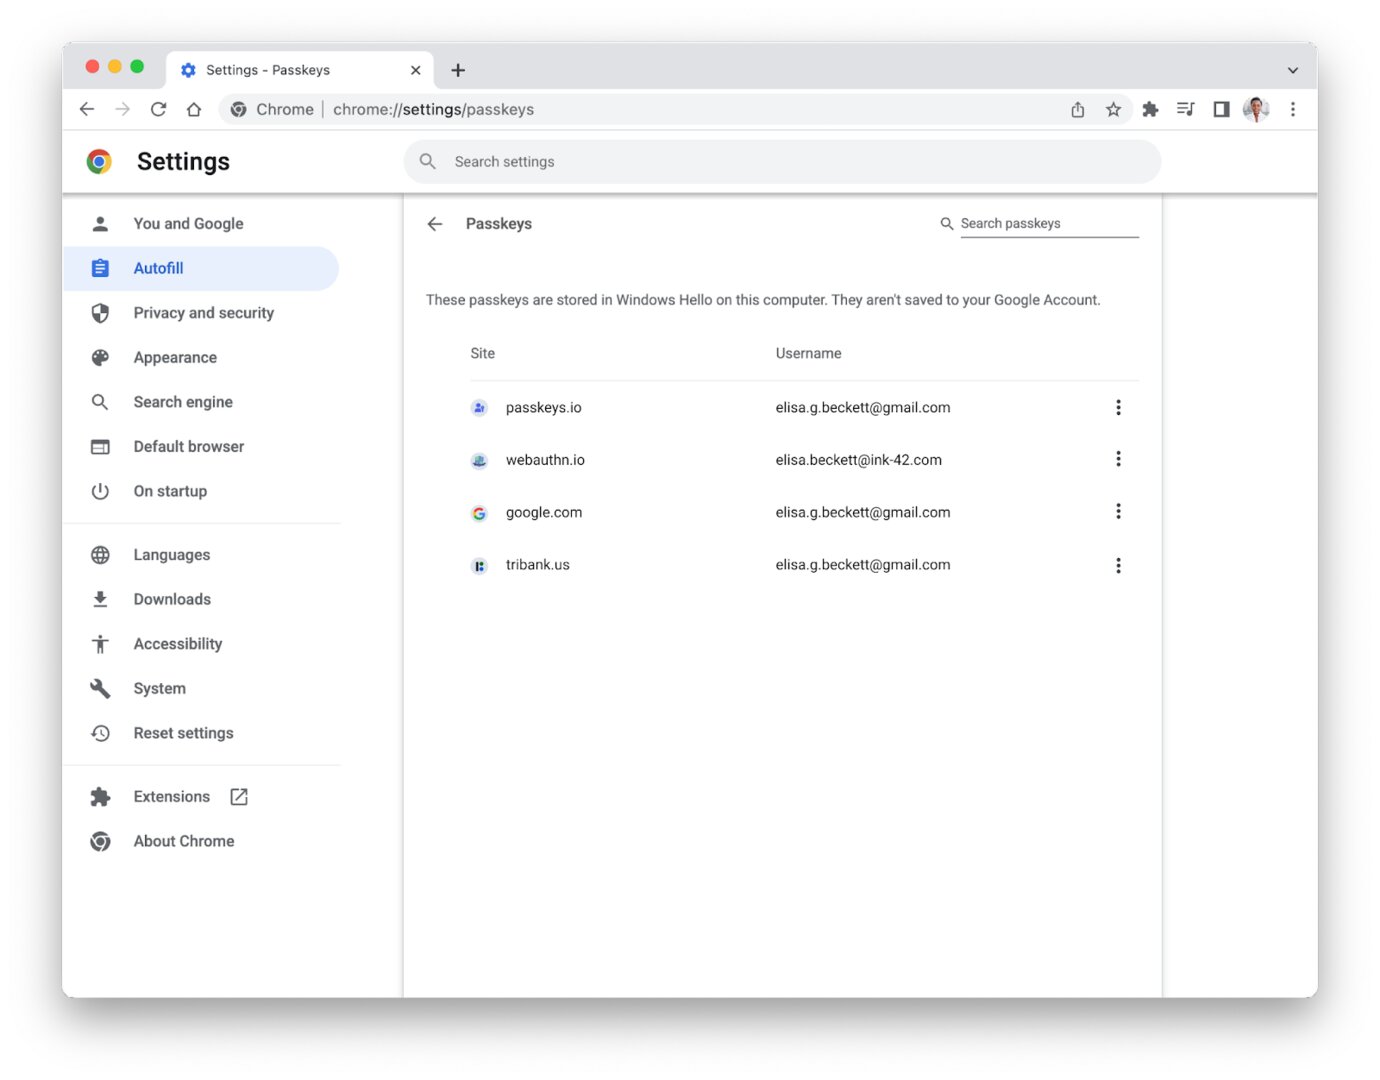 Passkey management in Chrome